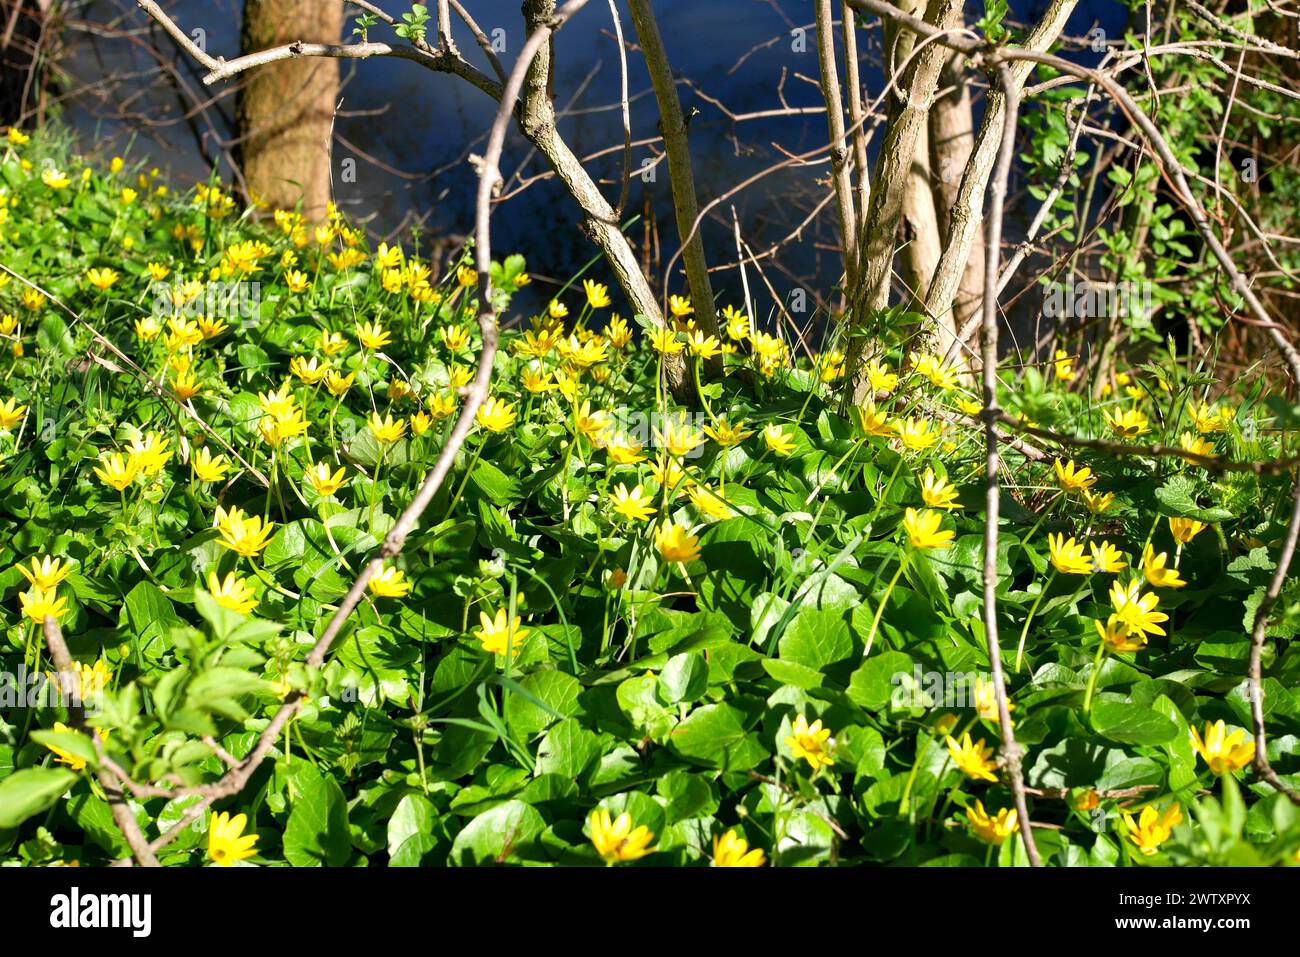 Lesser celandine, Ficaria verna, growing on fhe bank of the River Dsnube, Szigethalom, Hungary Stock Photo